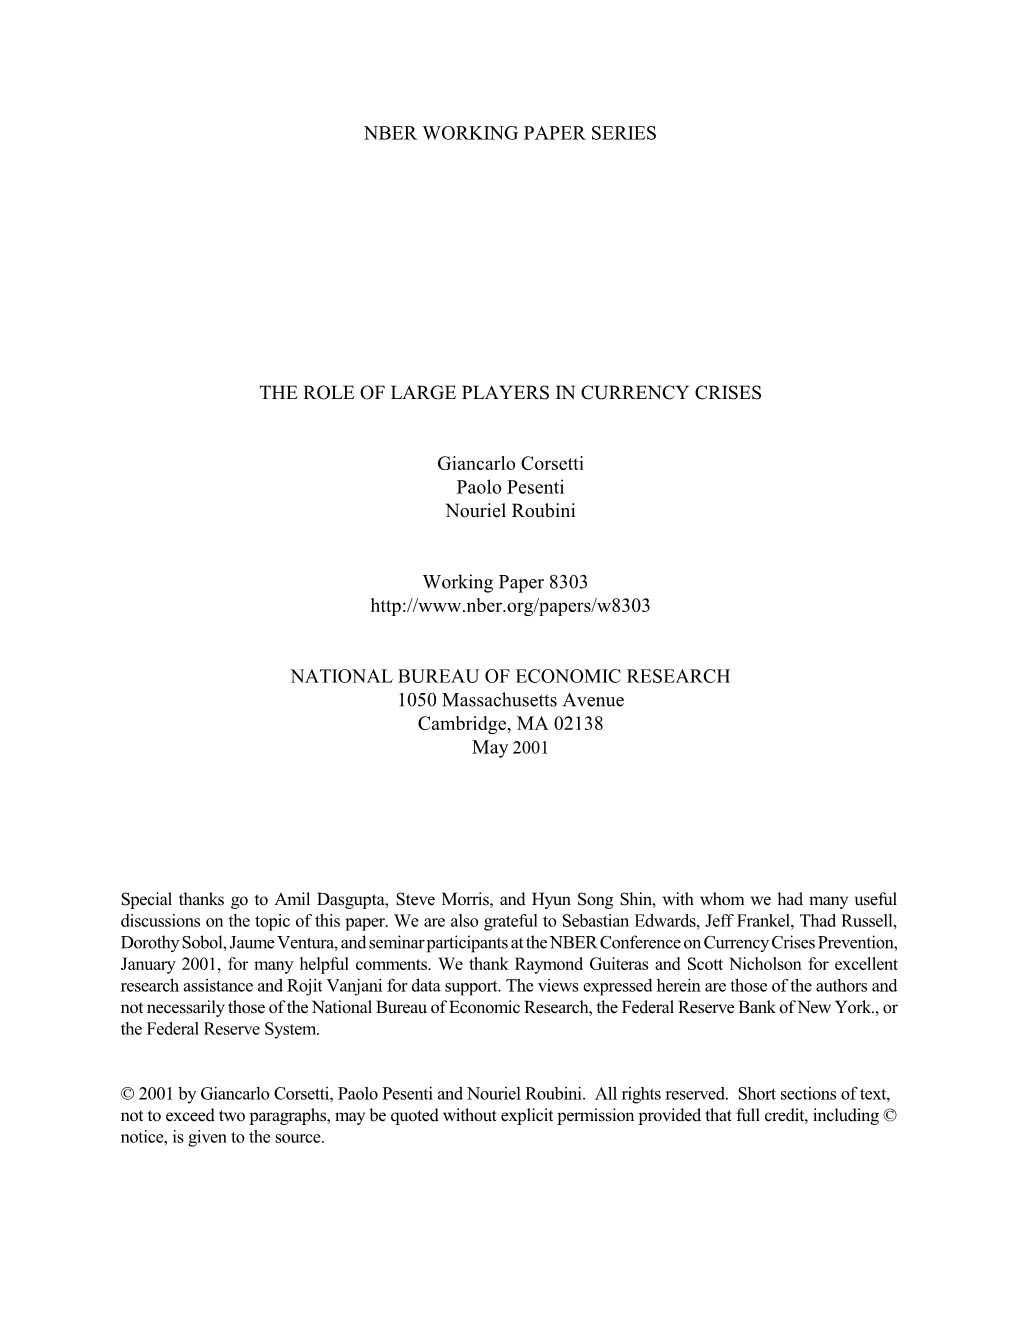 Nber Working Paper Series the Role of Large Players